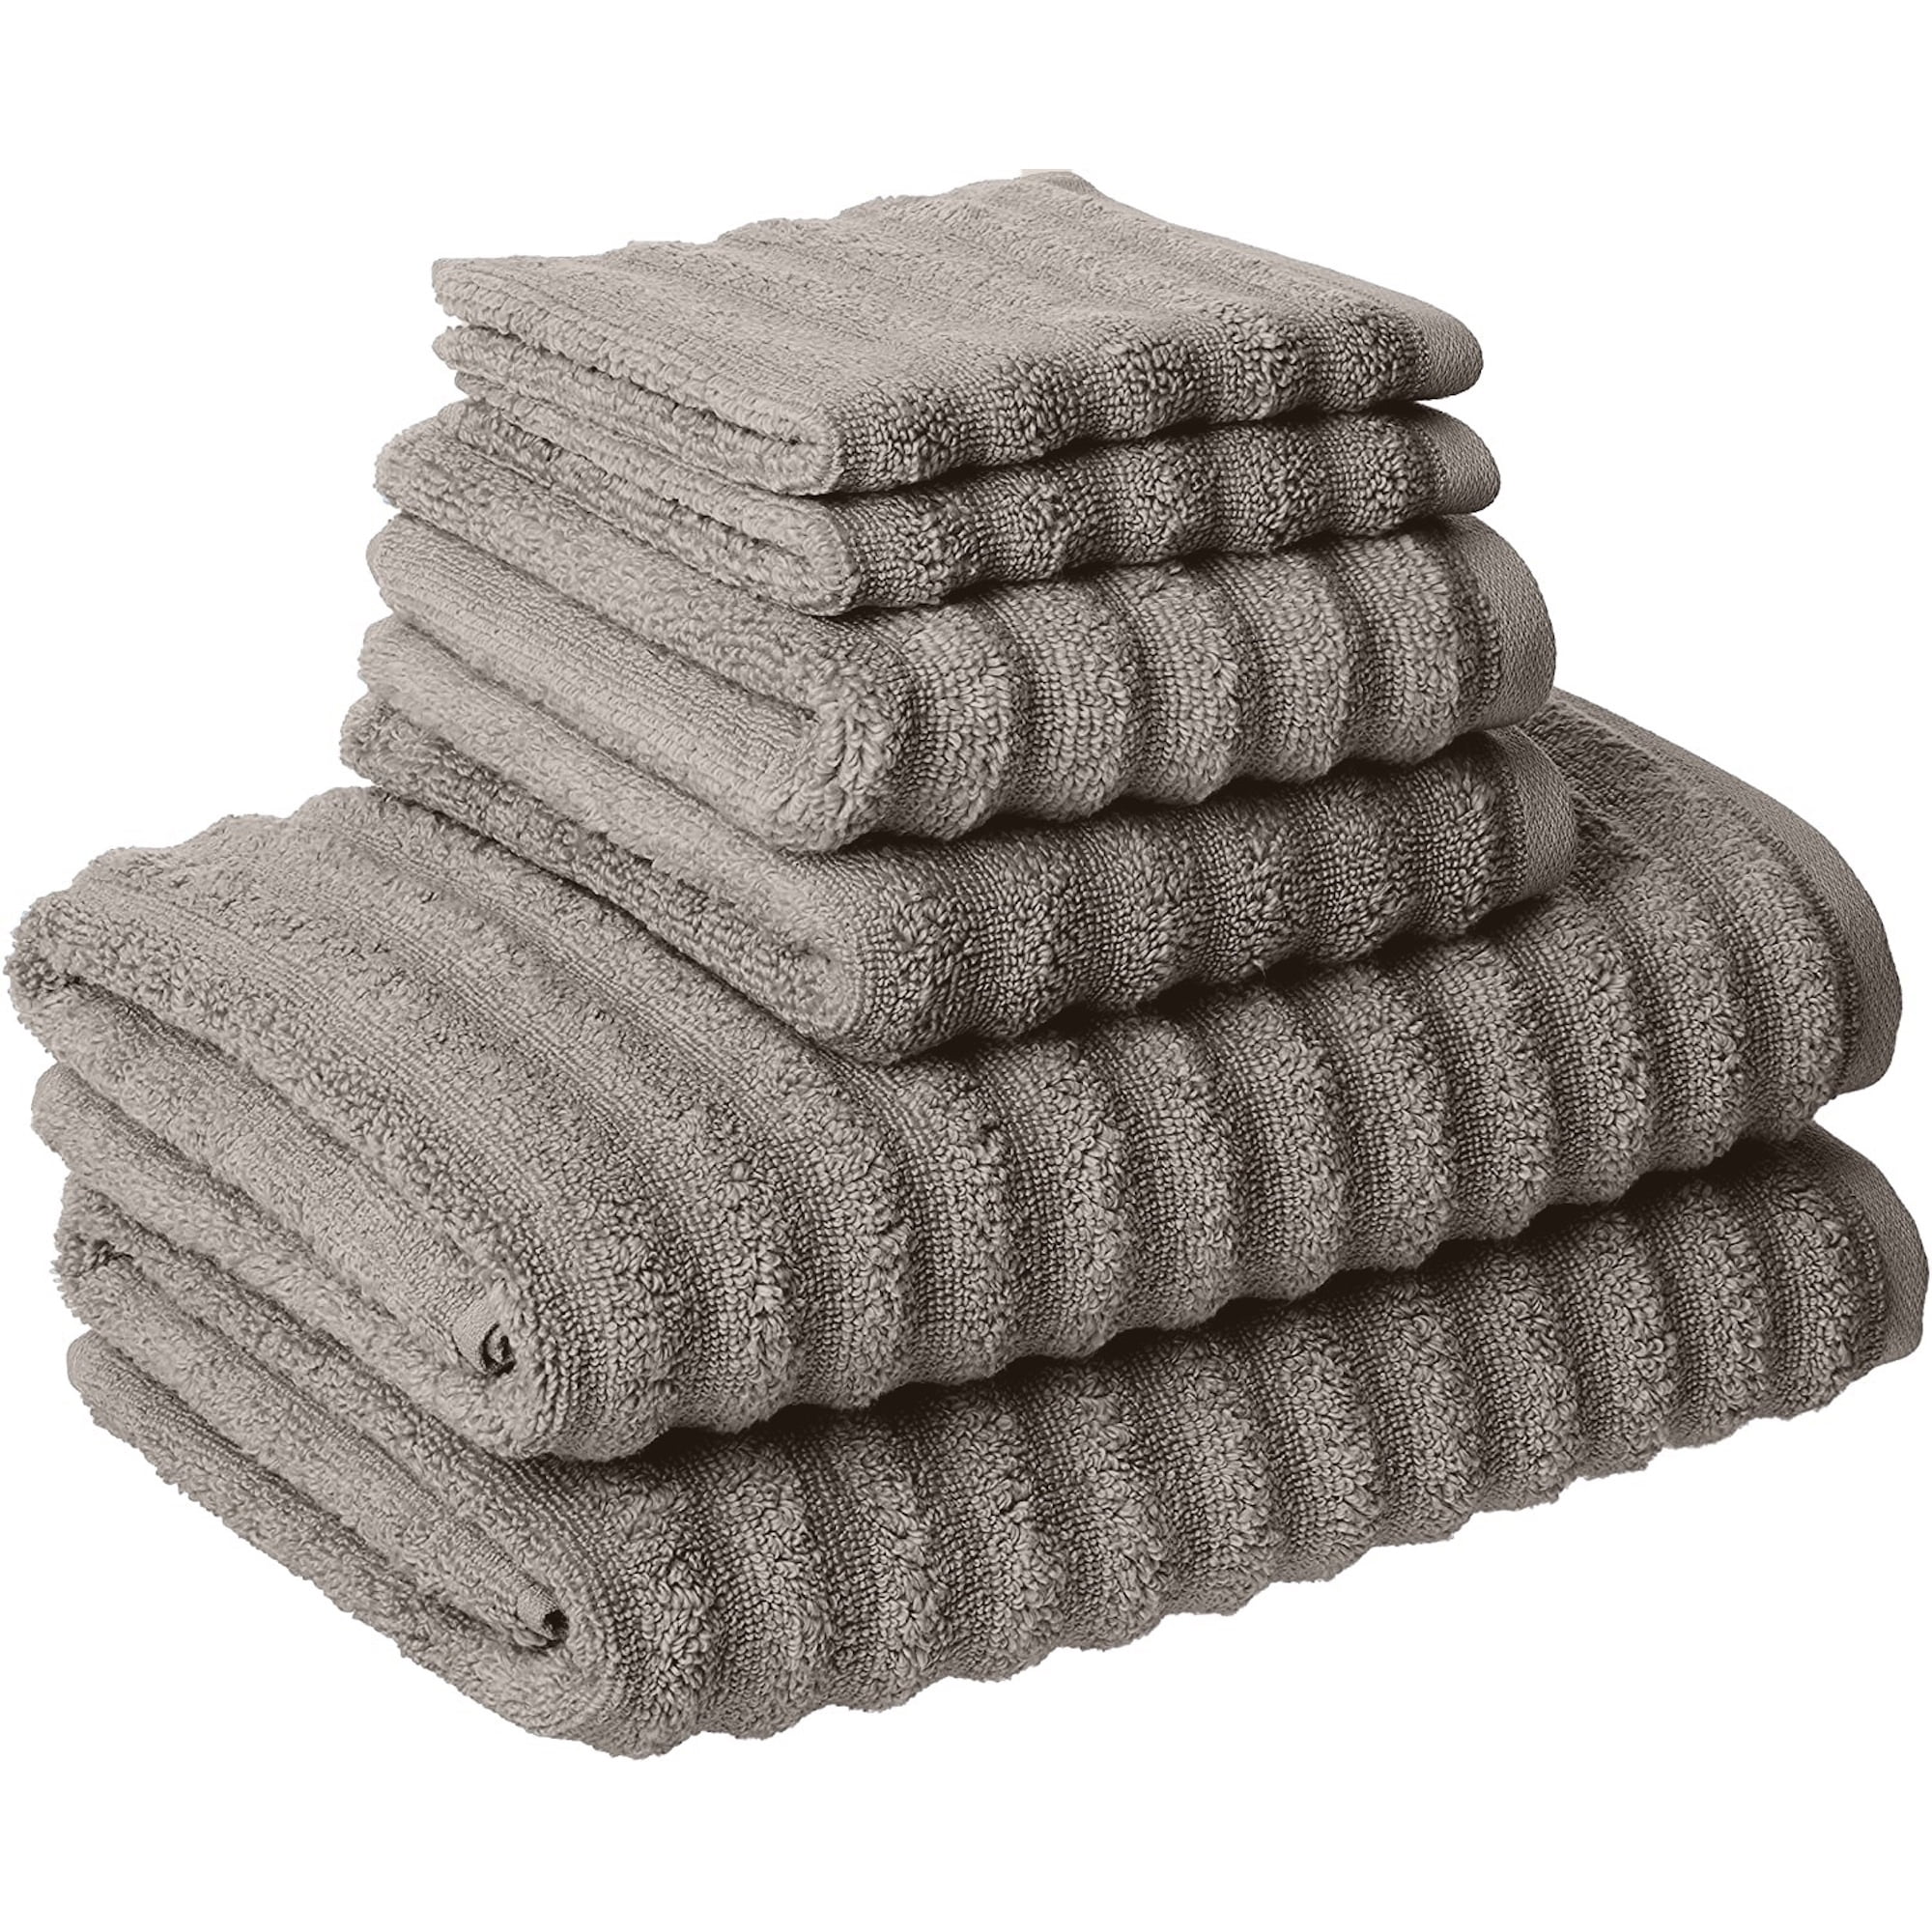 Bath Towel for Adults 73cmx33cm Absorbent Quick Drying Spa Body